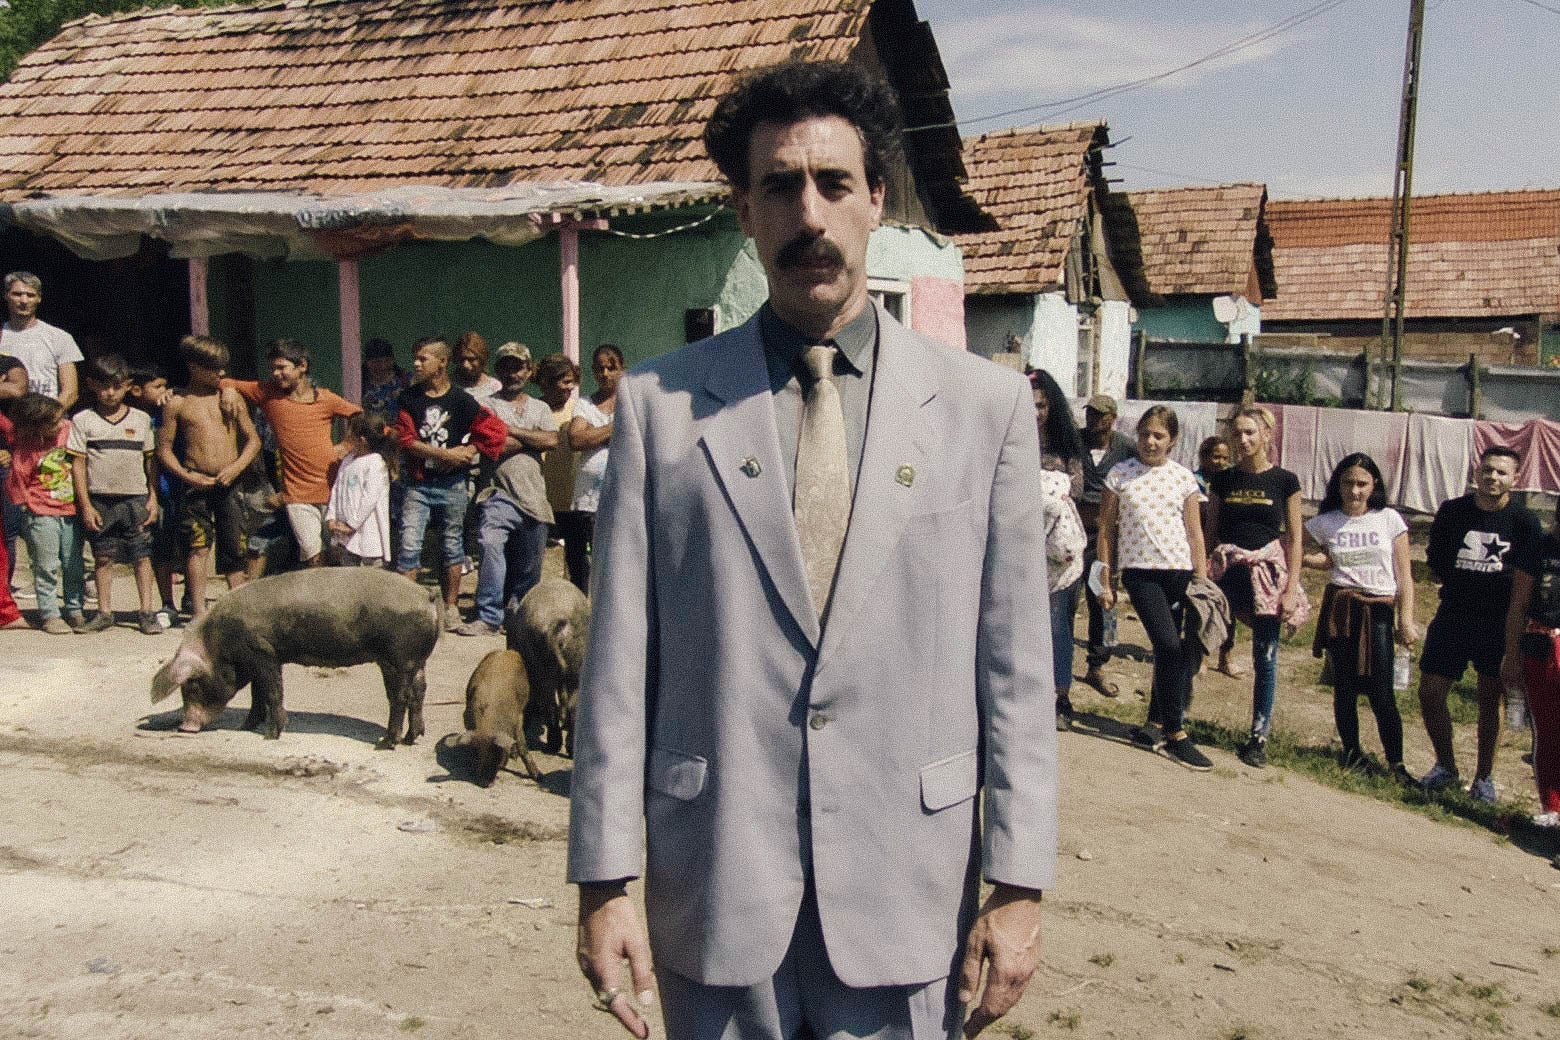 The actor looks very nice in his signature gray suit and Groucho Marx mustache, standing in front of a group of kids in a village